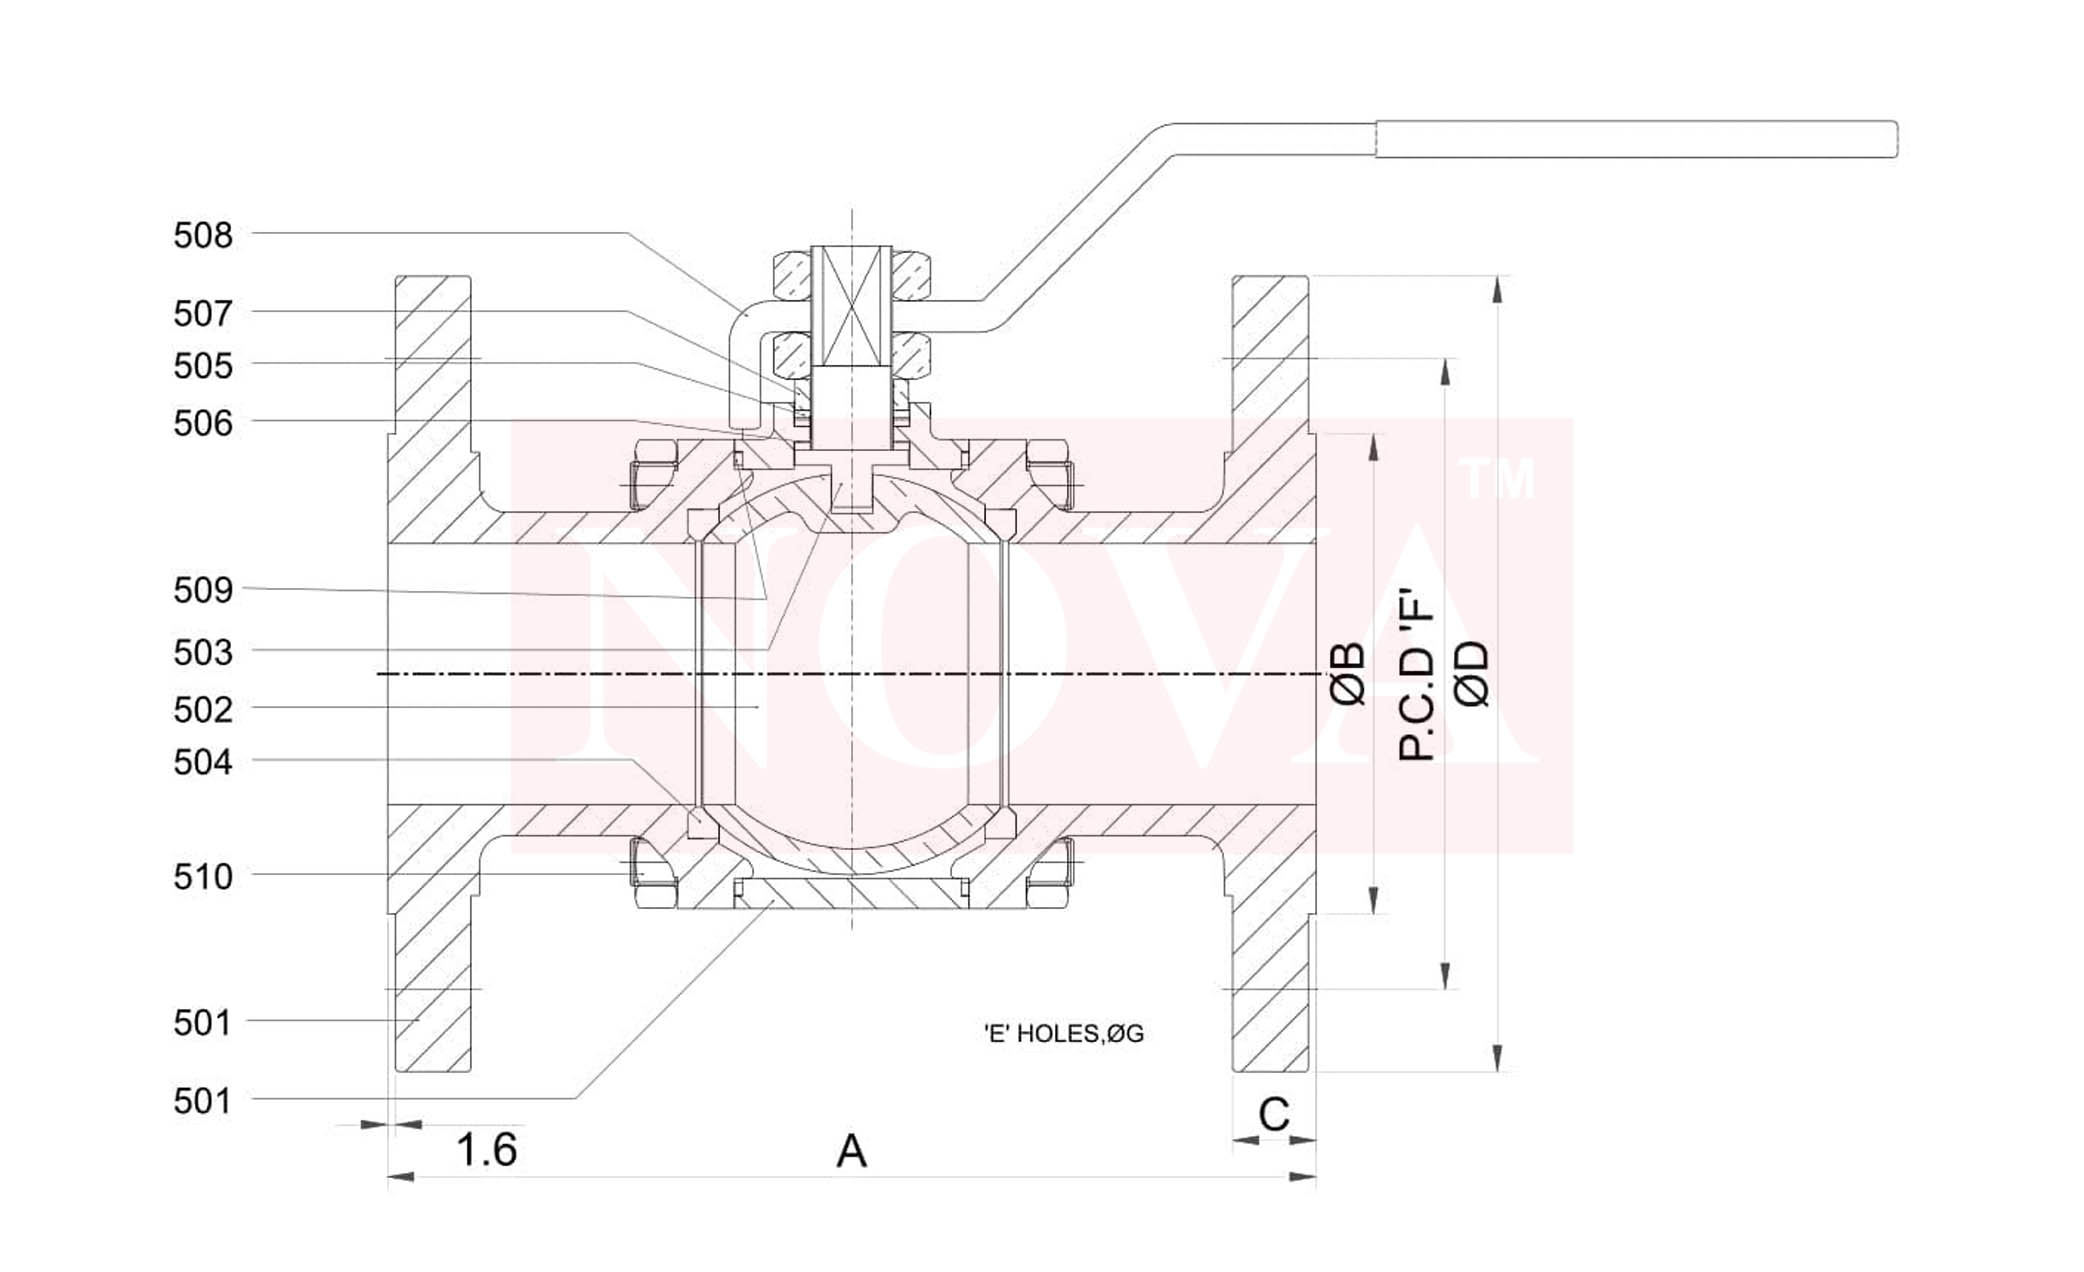 3 Piece Valve Ball Valve with Flange Drawing